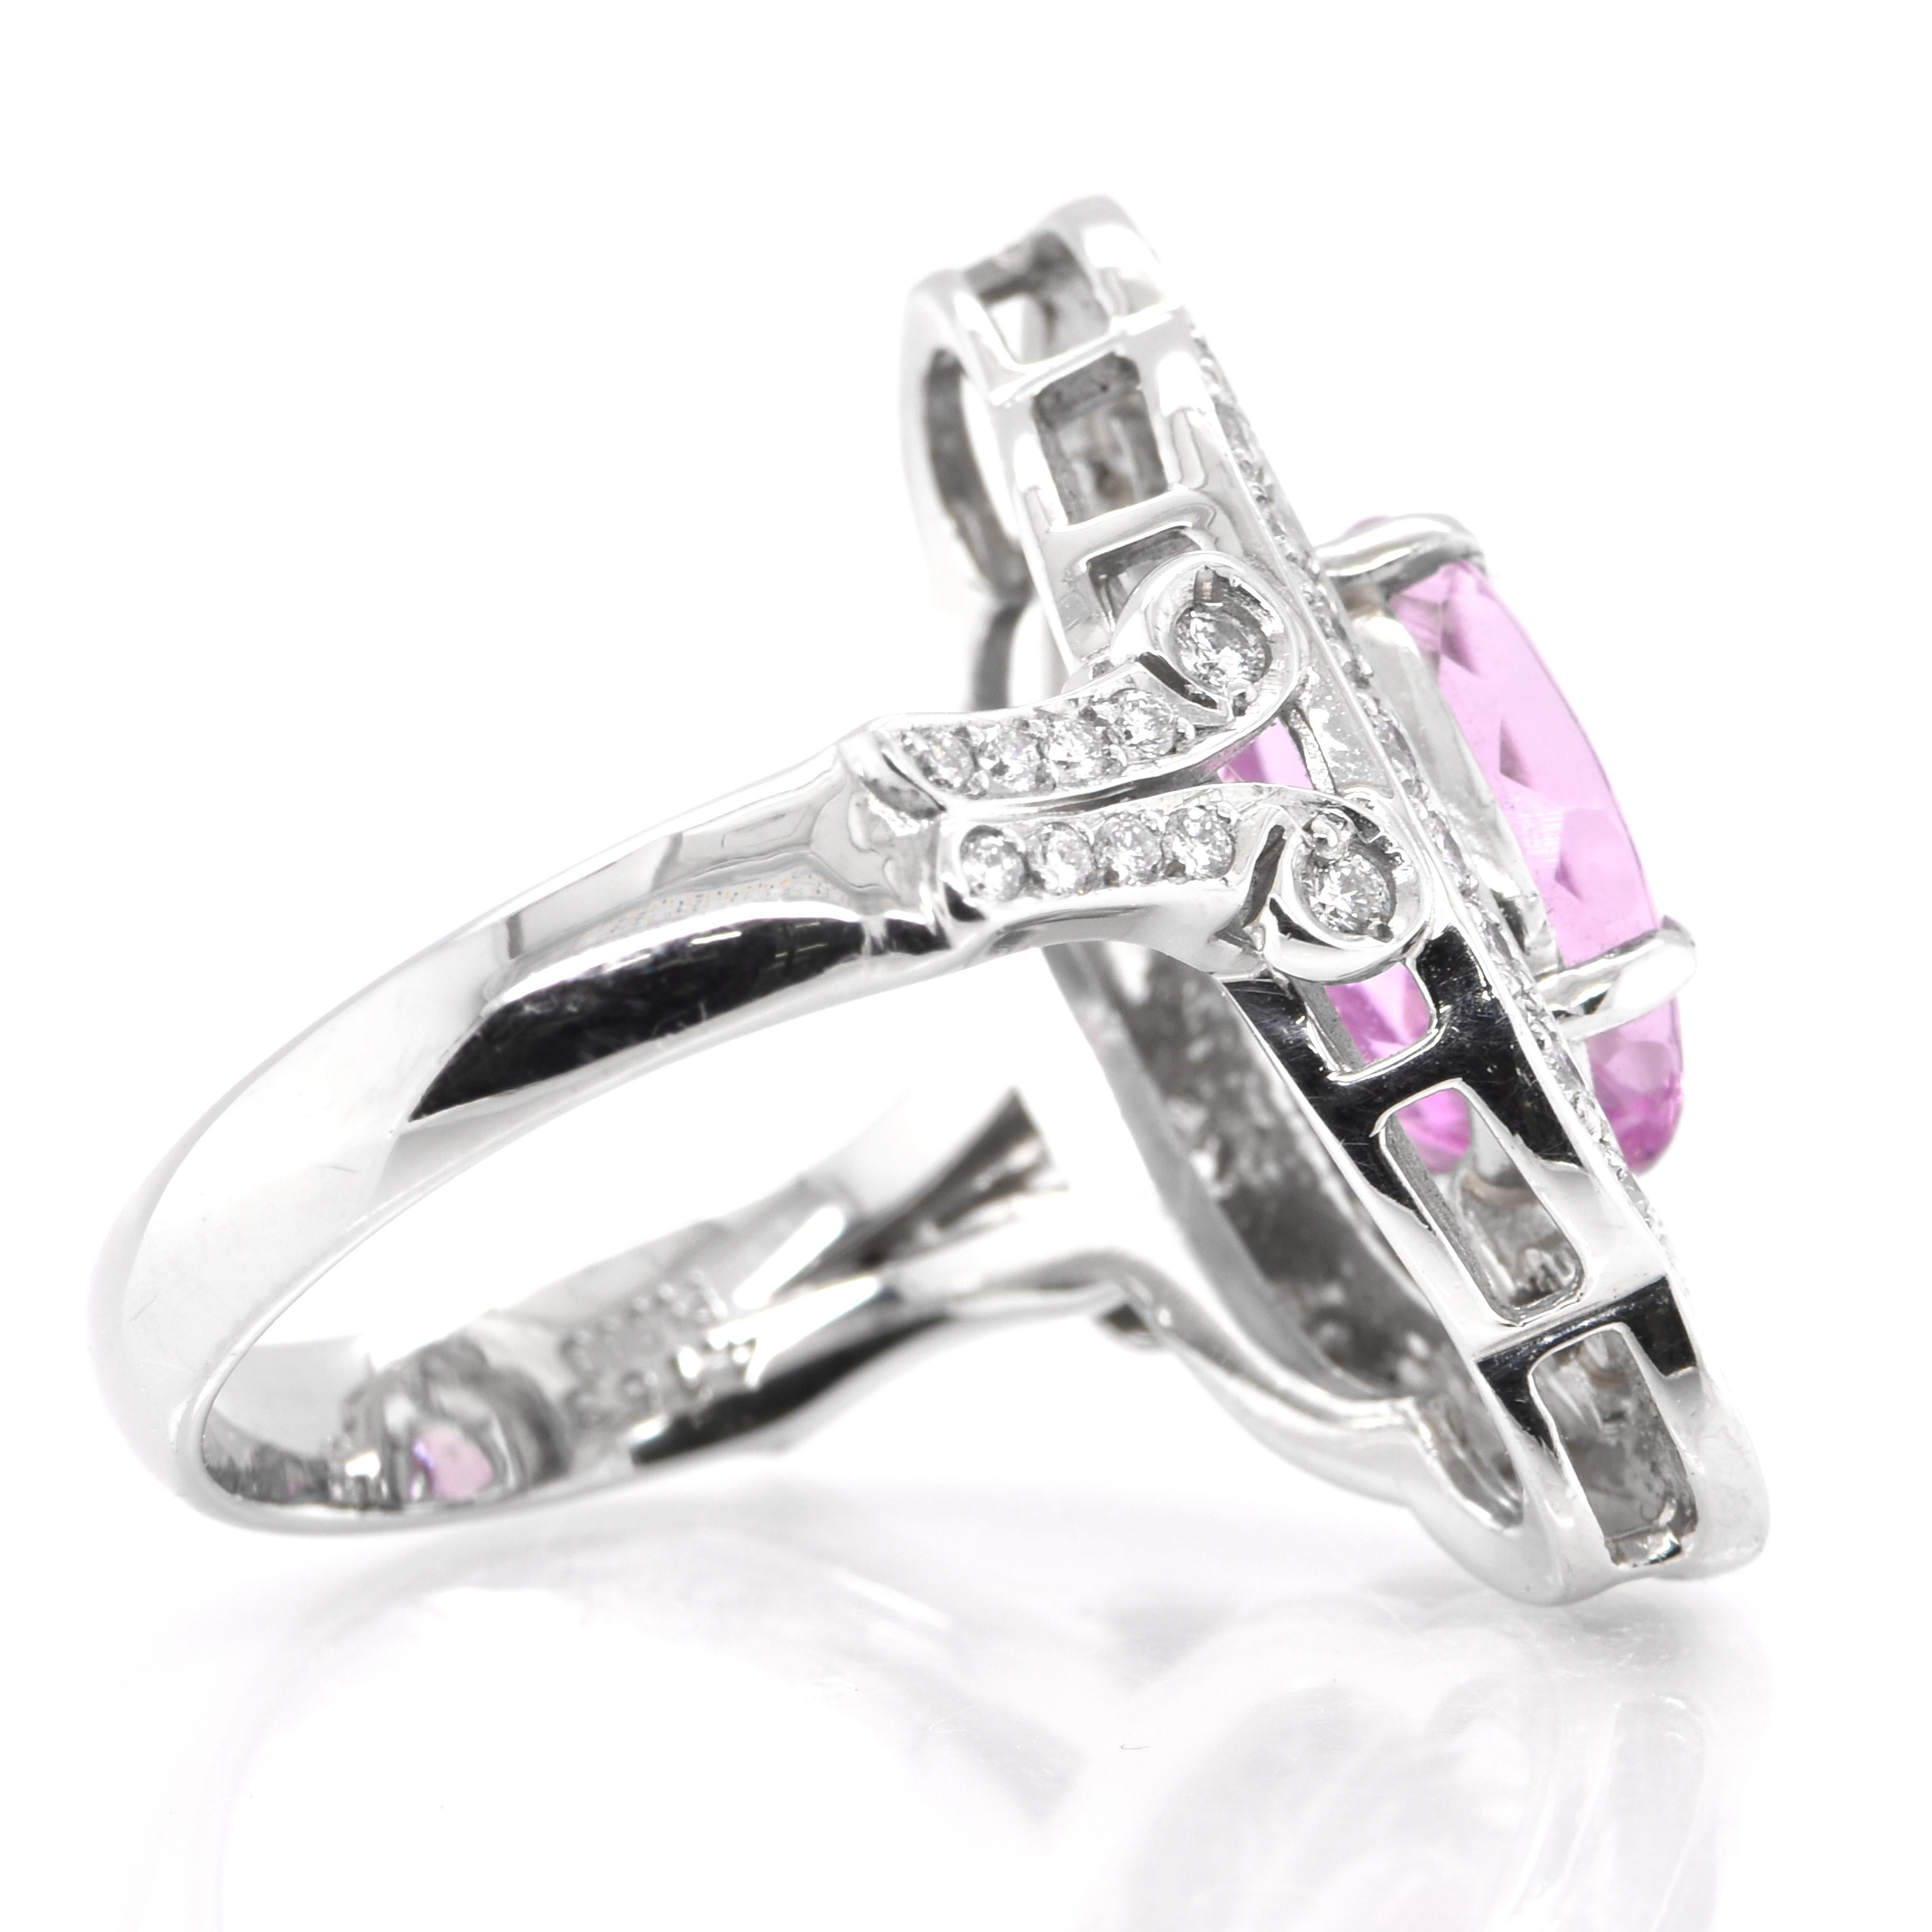 Women's Art Deco Style 4.15 Carat Natural Pink Topaz and Diamond Ring Set in Platinum